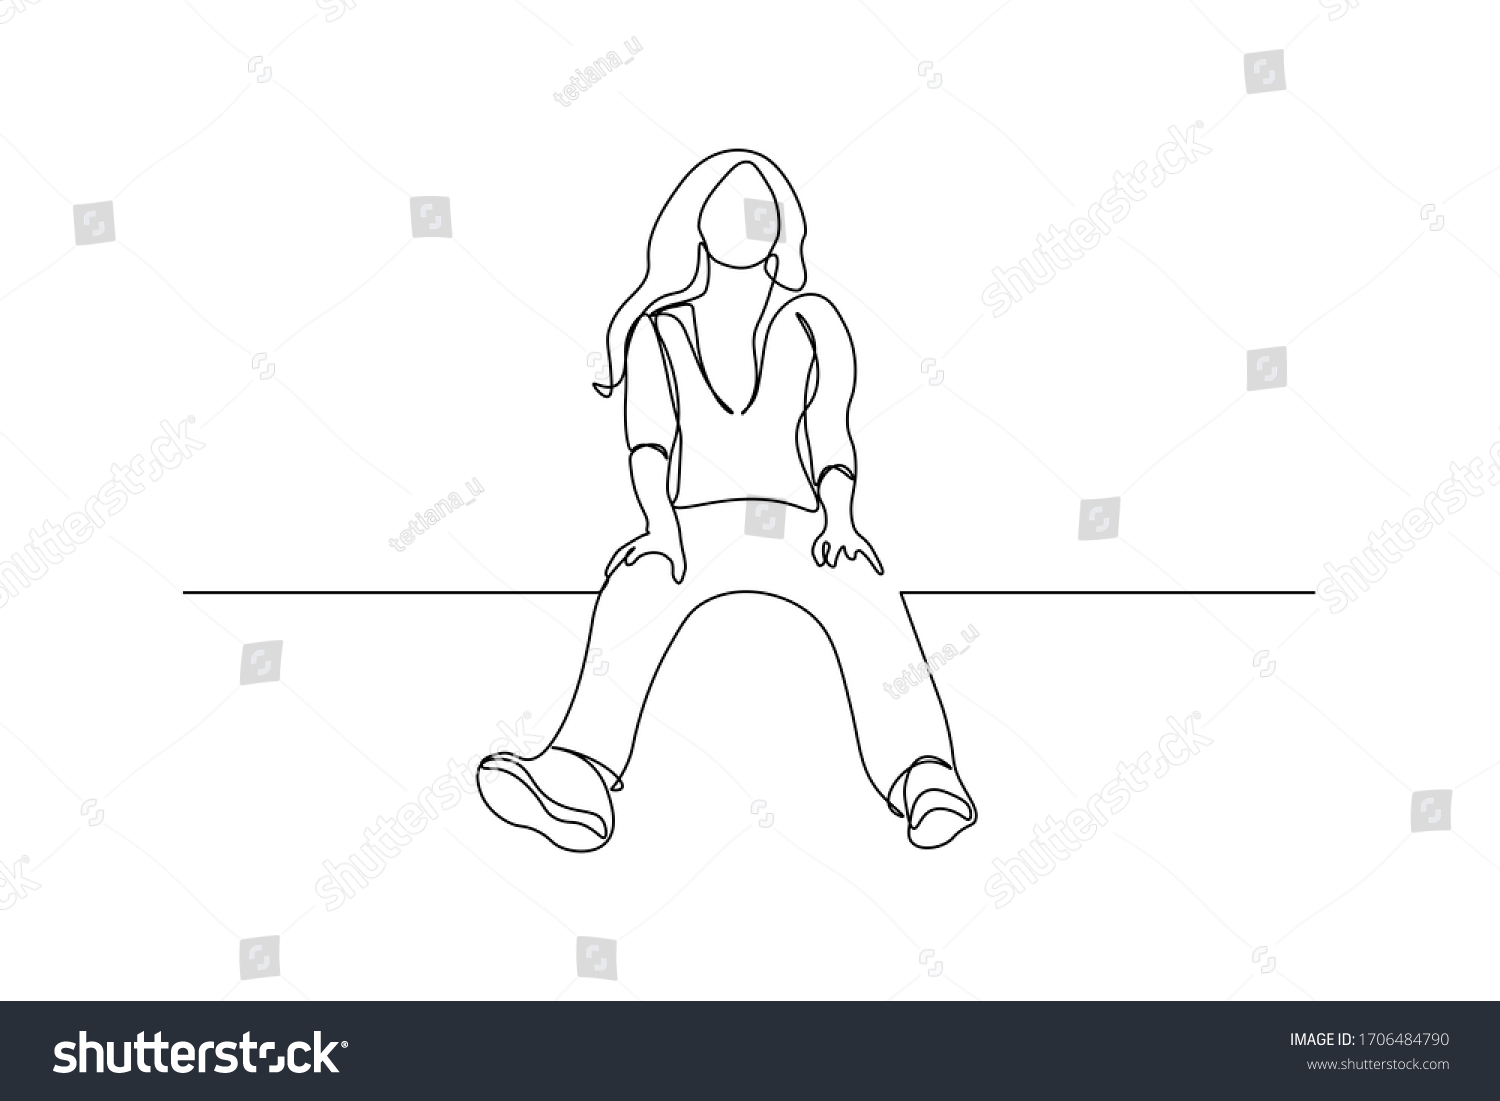 SVG of Girl sitting high with dangling feet in continuous line art drawing style. Minimalist black linear sketch isolated on white background. Vector illustration svg